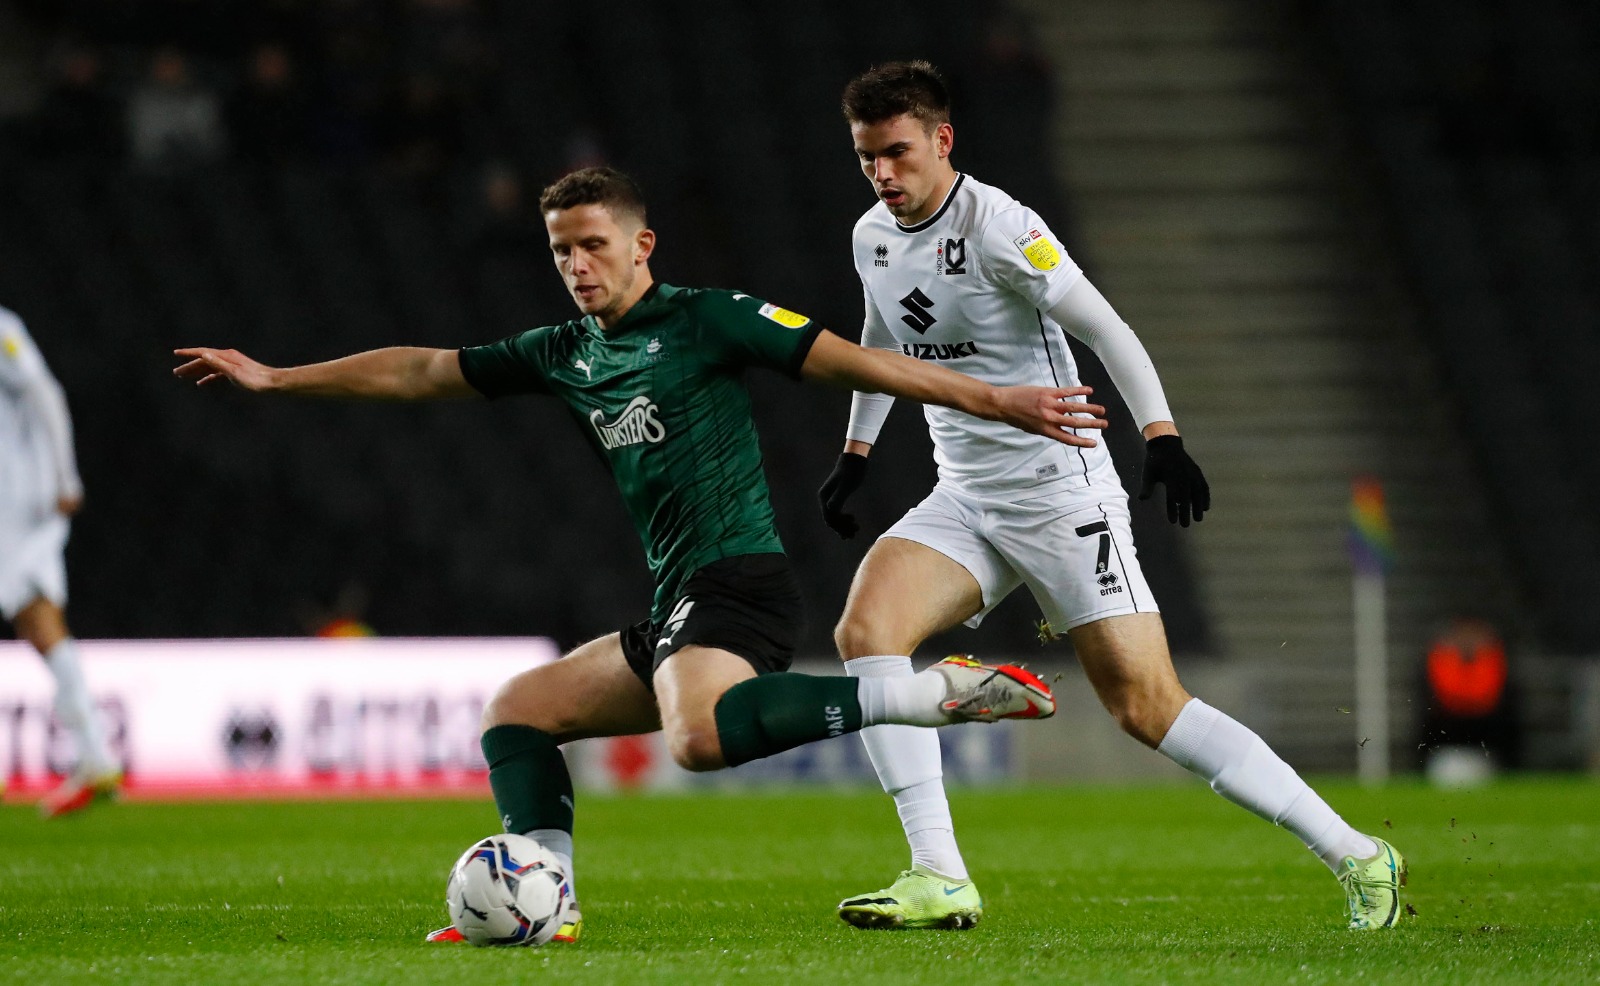 Argyle earn a draw at MK Dons